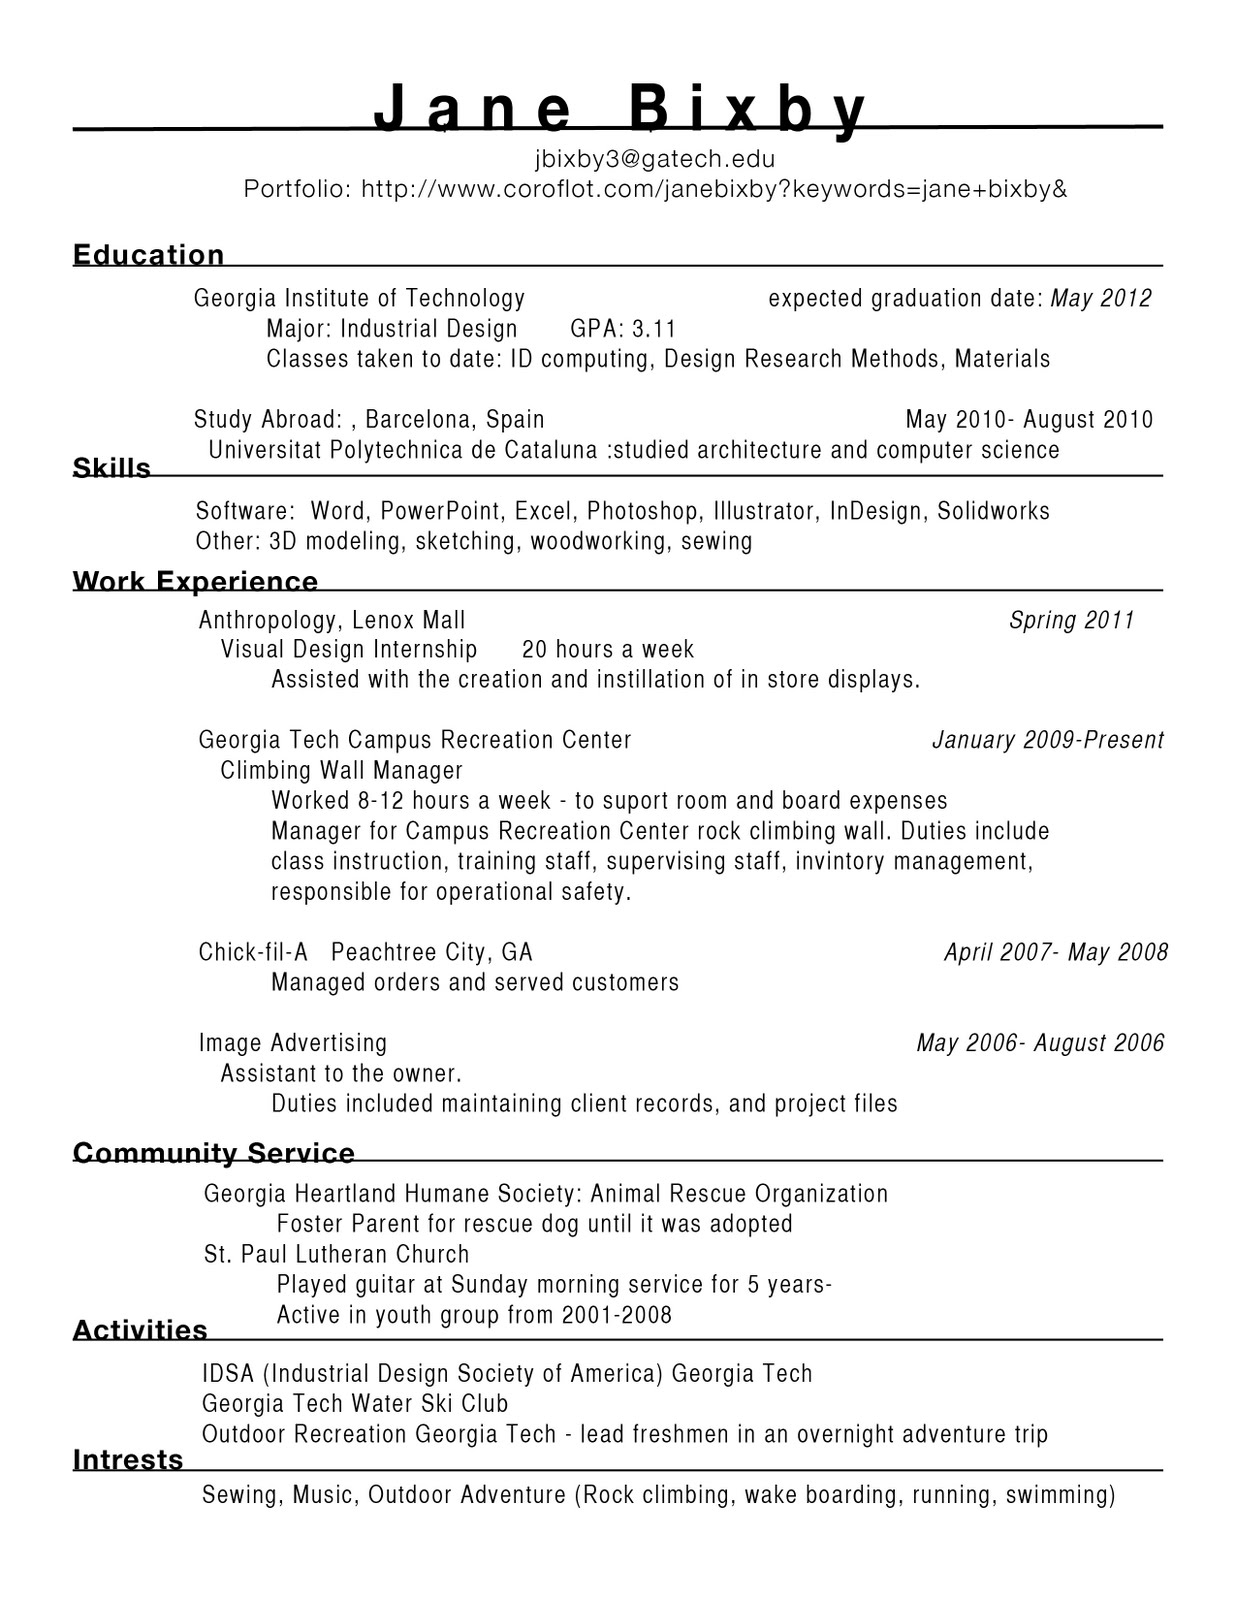 Easy to read resume font